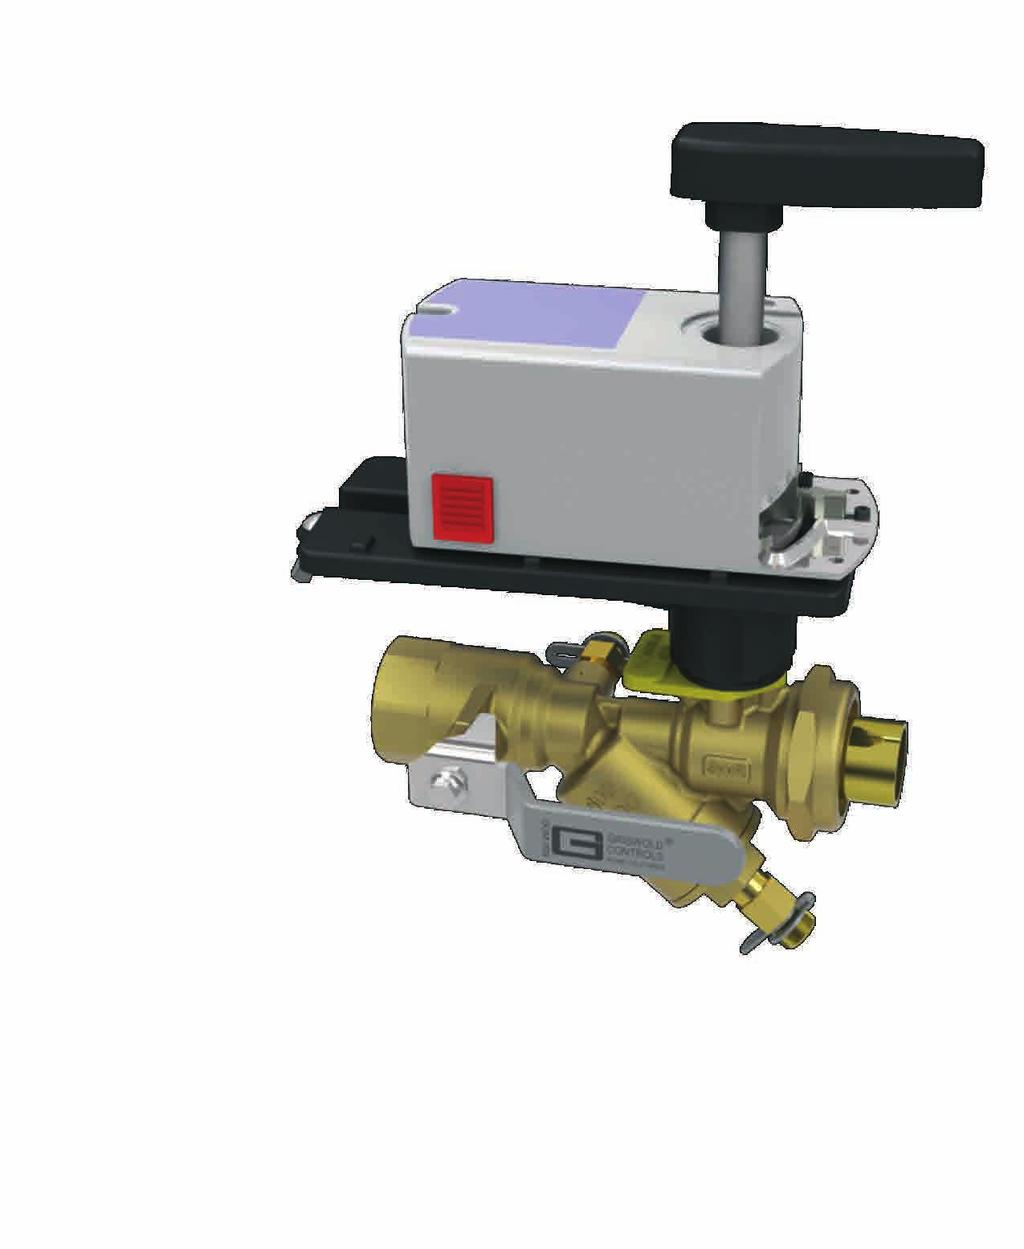 Where actuated valves and